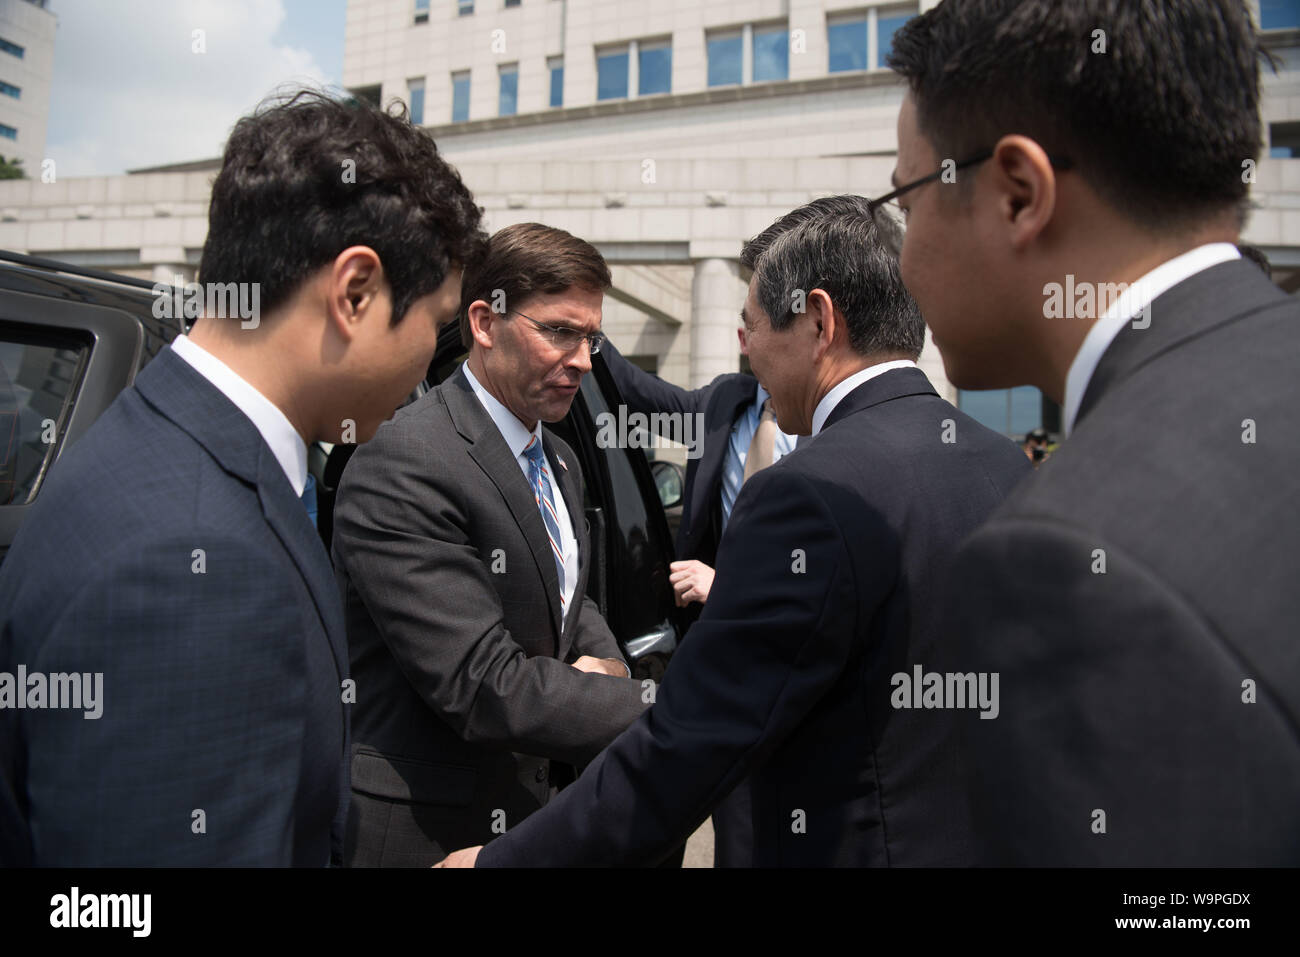 U.S. Secretary of Defense Dr. Mark T. Esper meets with Korean Minister of Defense Jeong Kyeong-doo in Seoul, Republic of Korea, Aug. 9, 2019. (DoD photo by U.S. Army Sgt. Amber I. Smith) Stock Photo